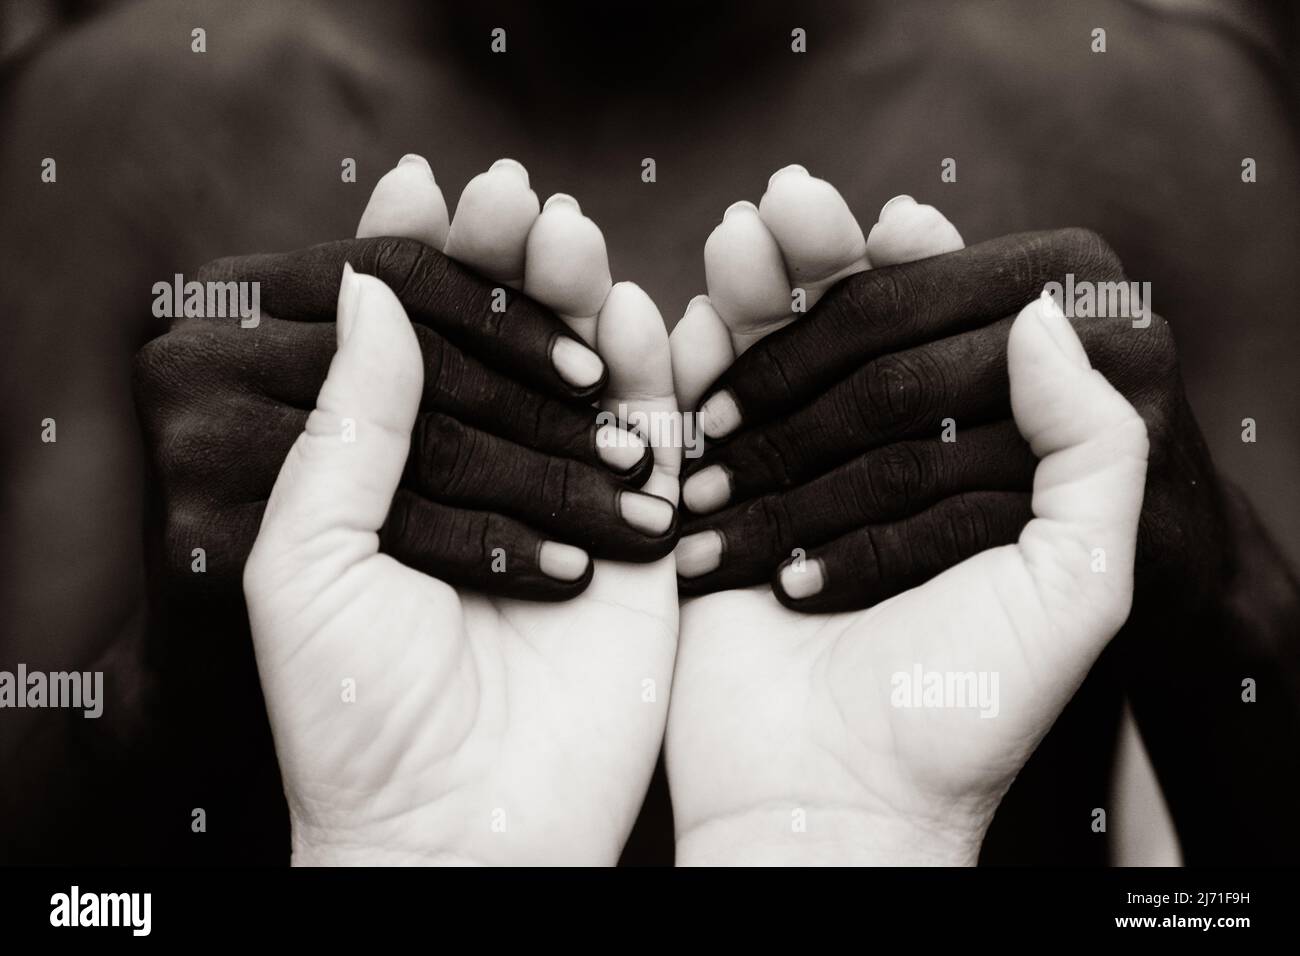 Black person holding hands of white person in sign of compassion and solidarity. Fighting racism together with love. Stock Photo